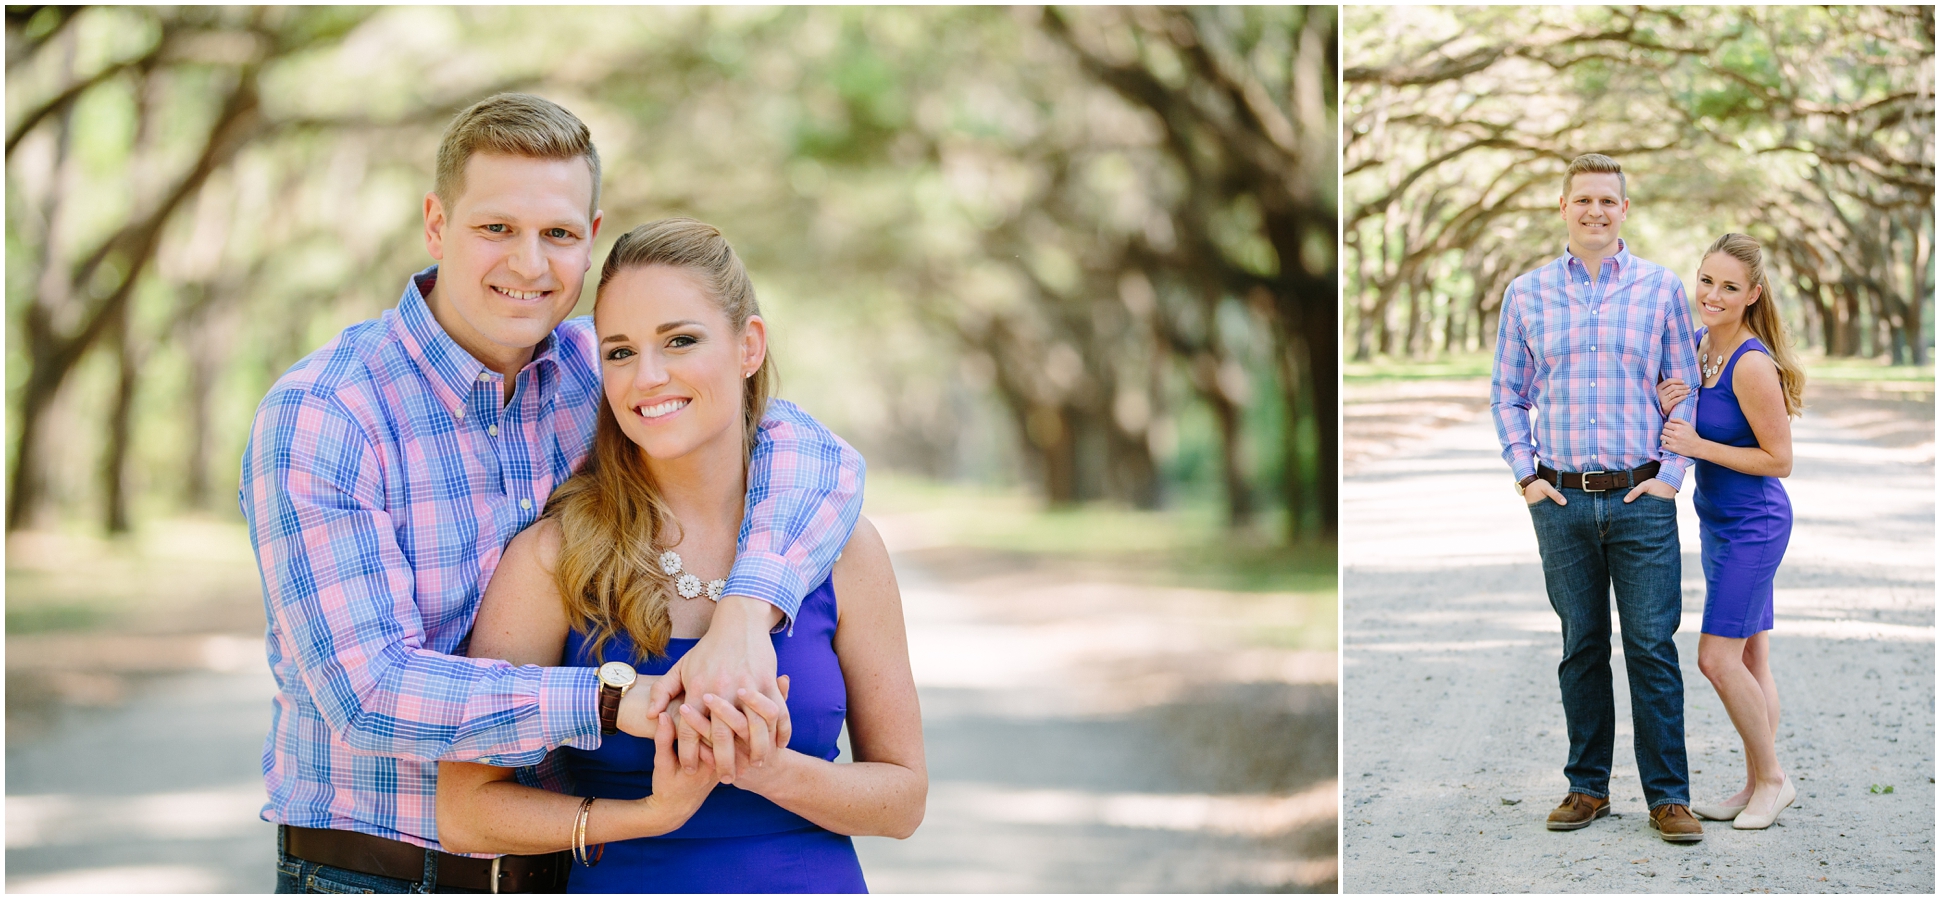 Two Chics Photography | A Wormsloe Plantation and Historic Savannah Georgia Engagement Session | www.twochicsphotography.com